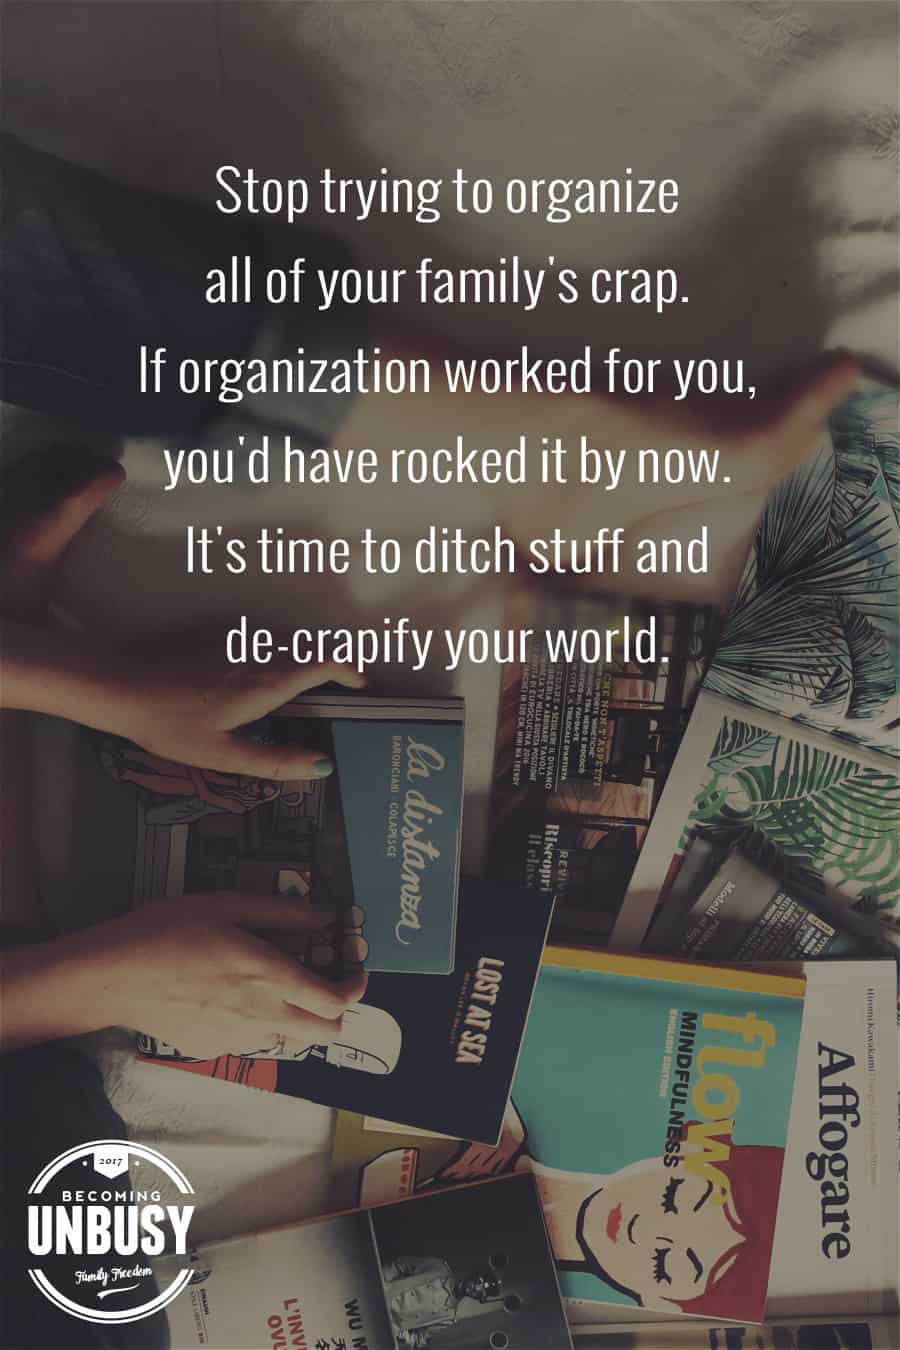 Stop trying to organize all of your family’s crap. If organization worked for you, you’d have rocked it by now. It’s time to ditch stuff and de-crapify your world. #declutter #minimalism #organization #BecomingUnBusy *Loving this 100 Things Weekend Challenge idea!